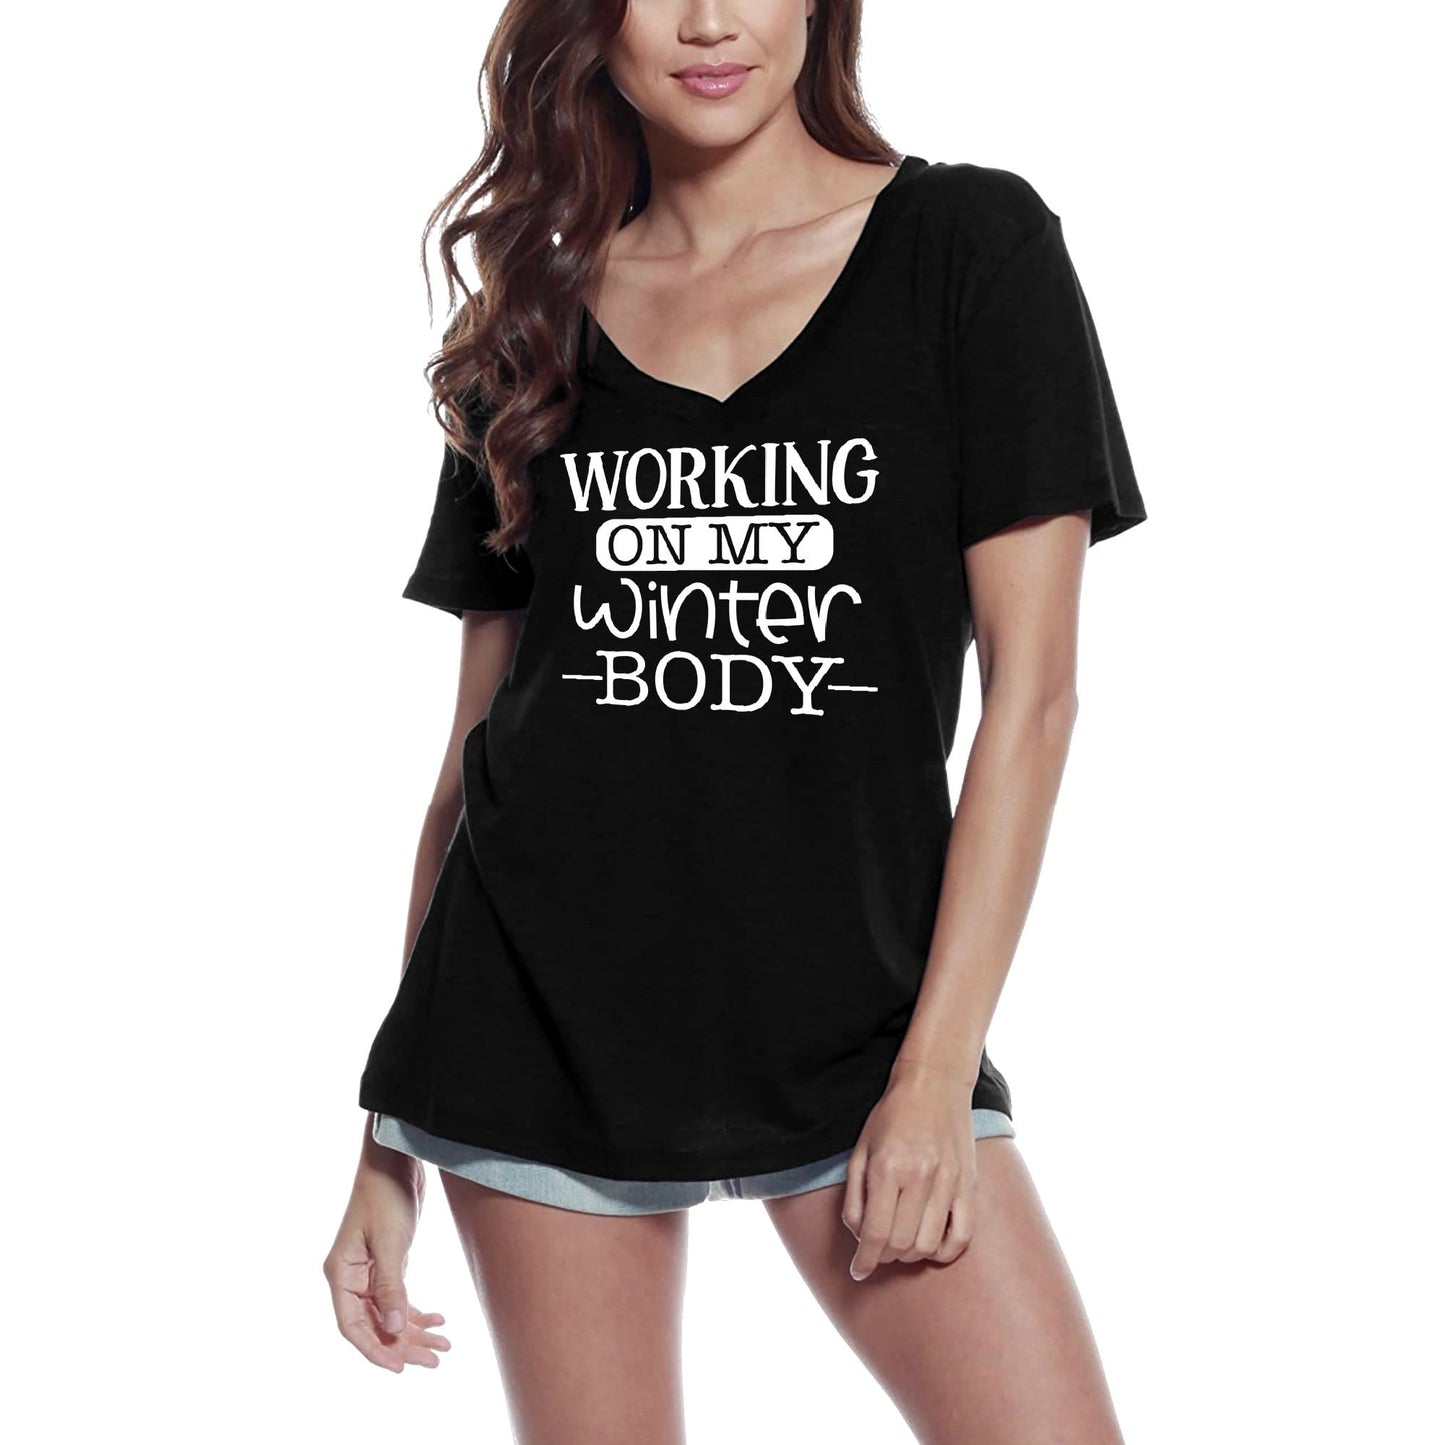 ULTRABASIC Women's Novelty T-Shirt Working On My Winter Body - Funny Quote